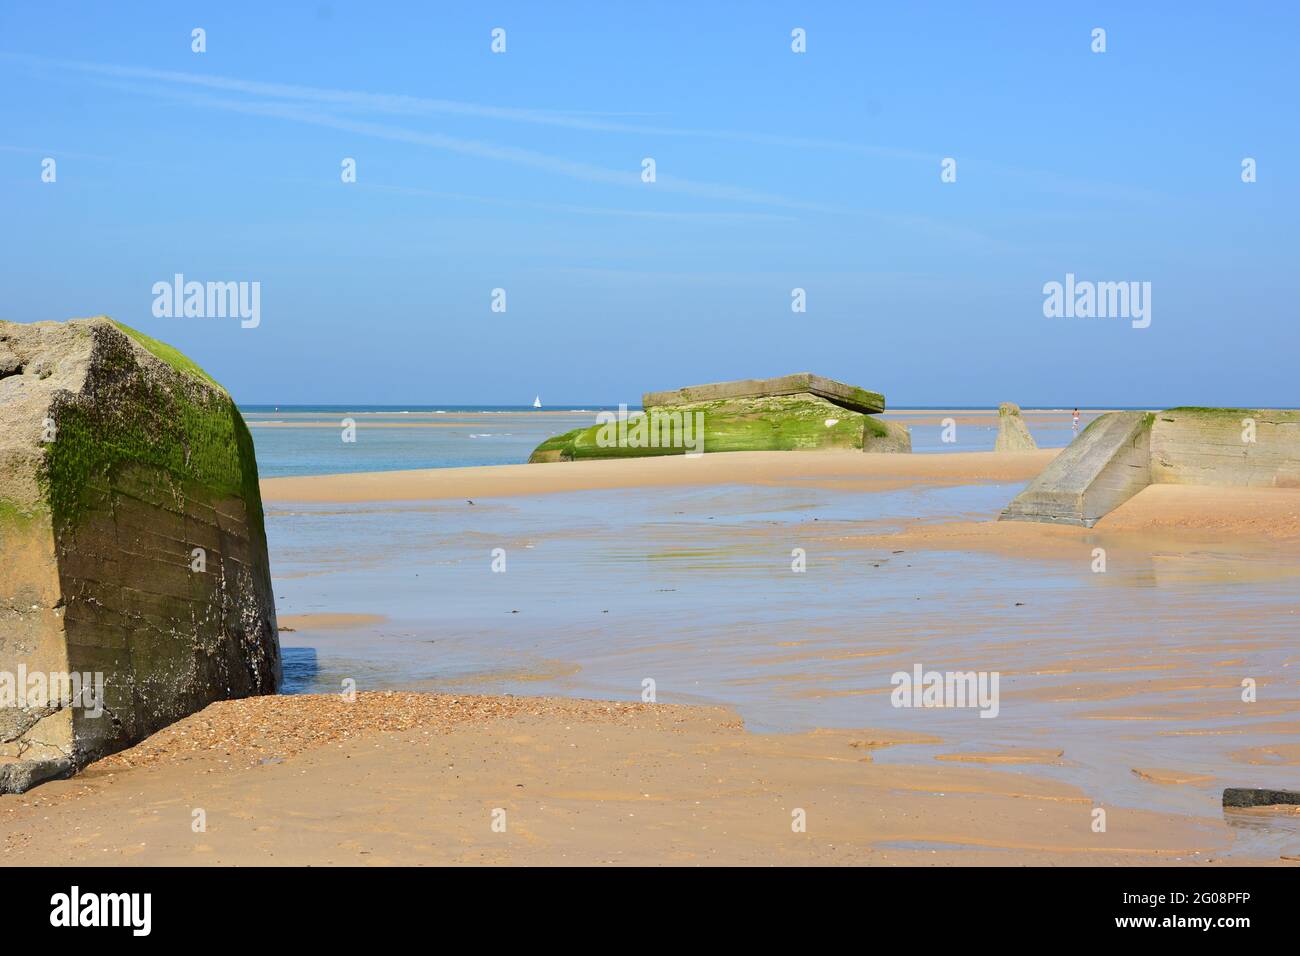 France, Aquitaine, Cap Ferret, this drifting bunkers, remains of Atlantic wall, are gradualy submerged under the effect of tides and storms. Stock Photo